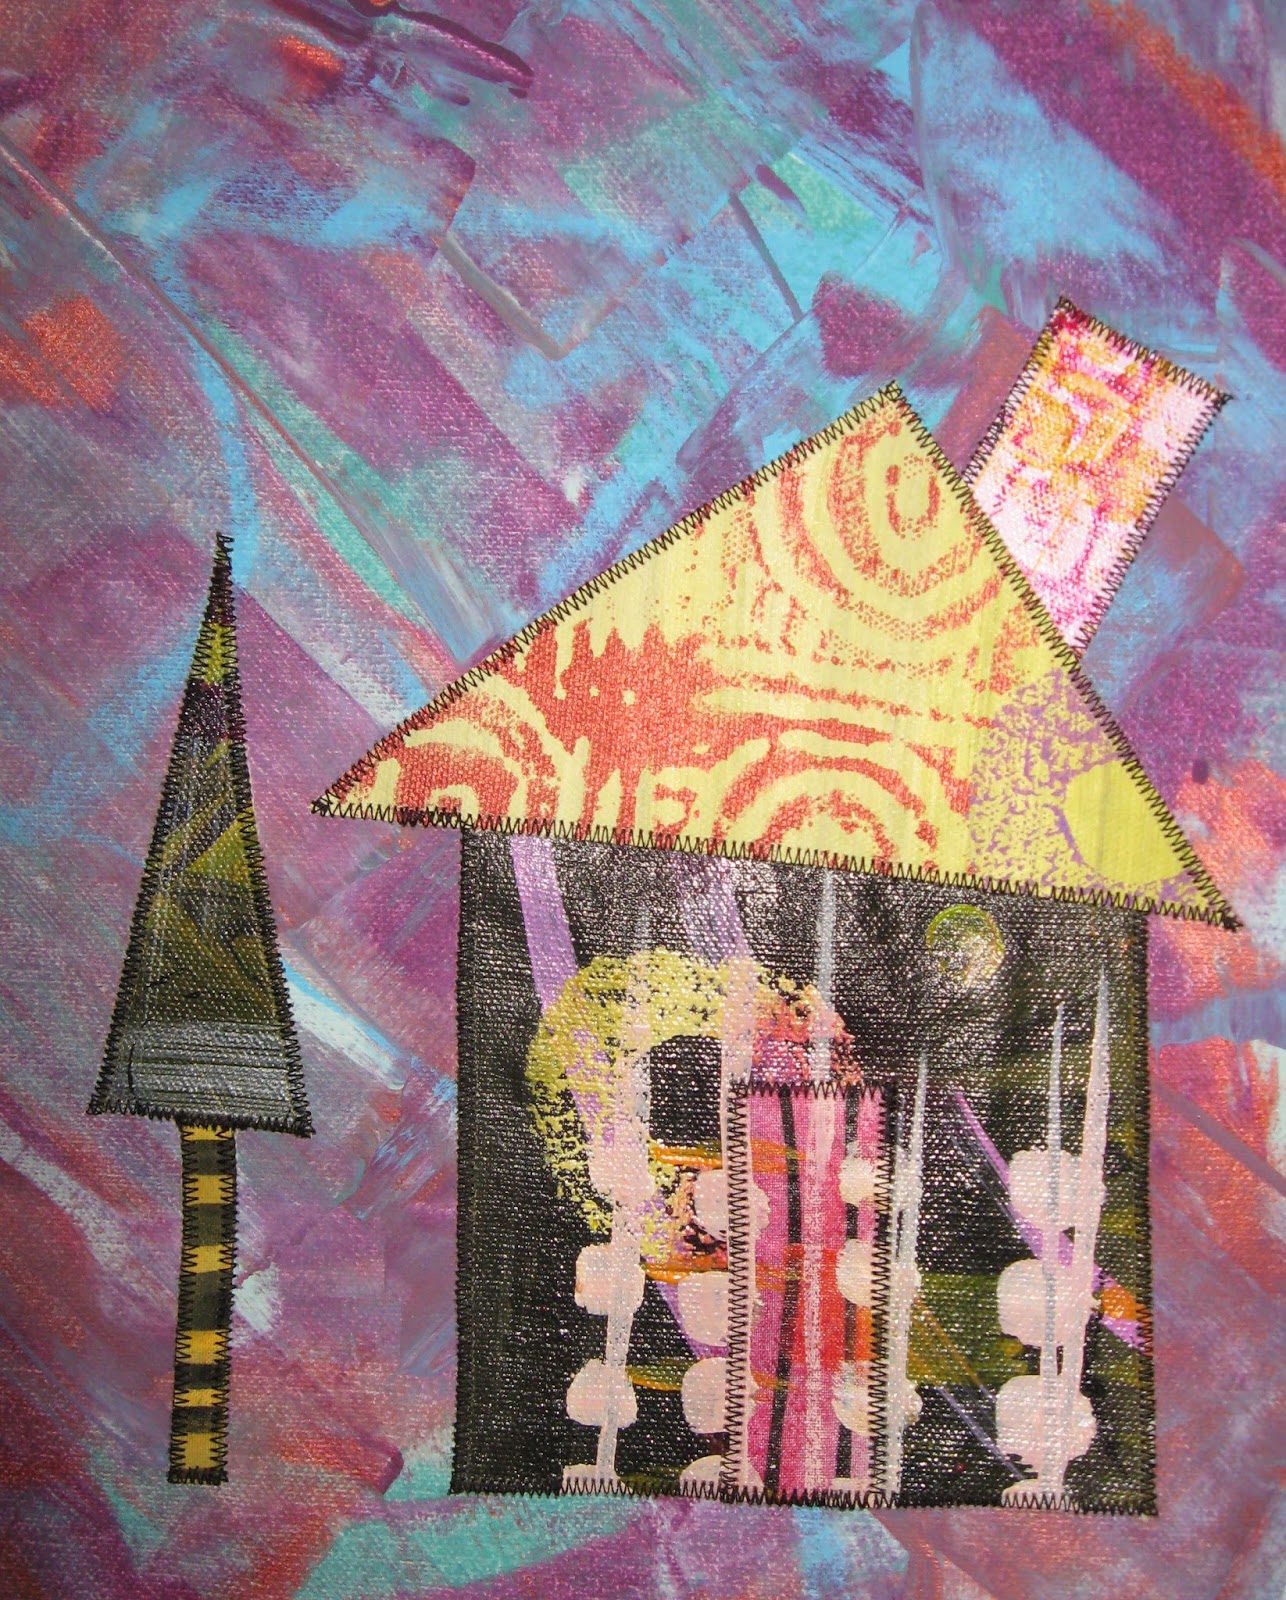 Enchanted Art 2: Fabric Collage